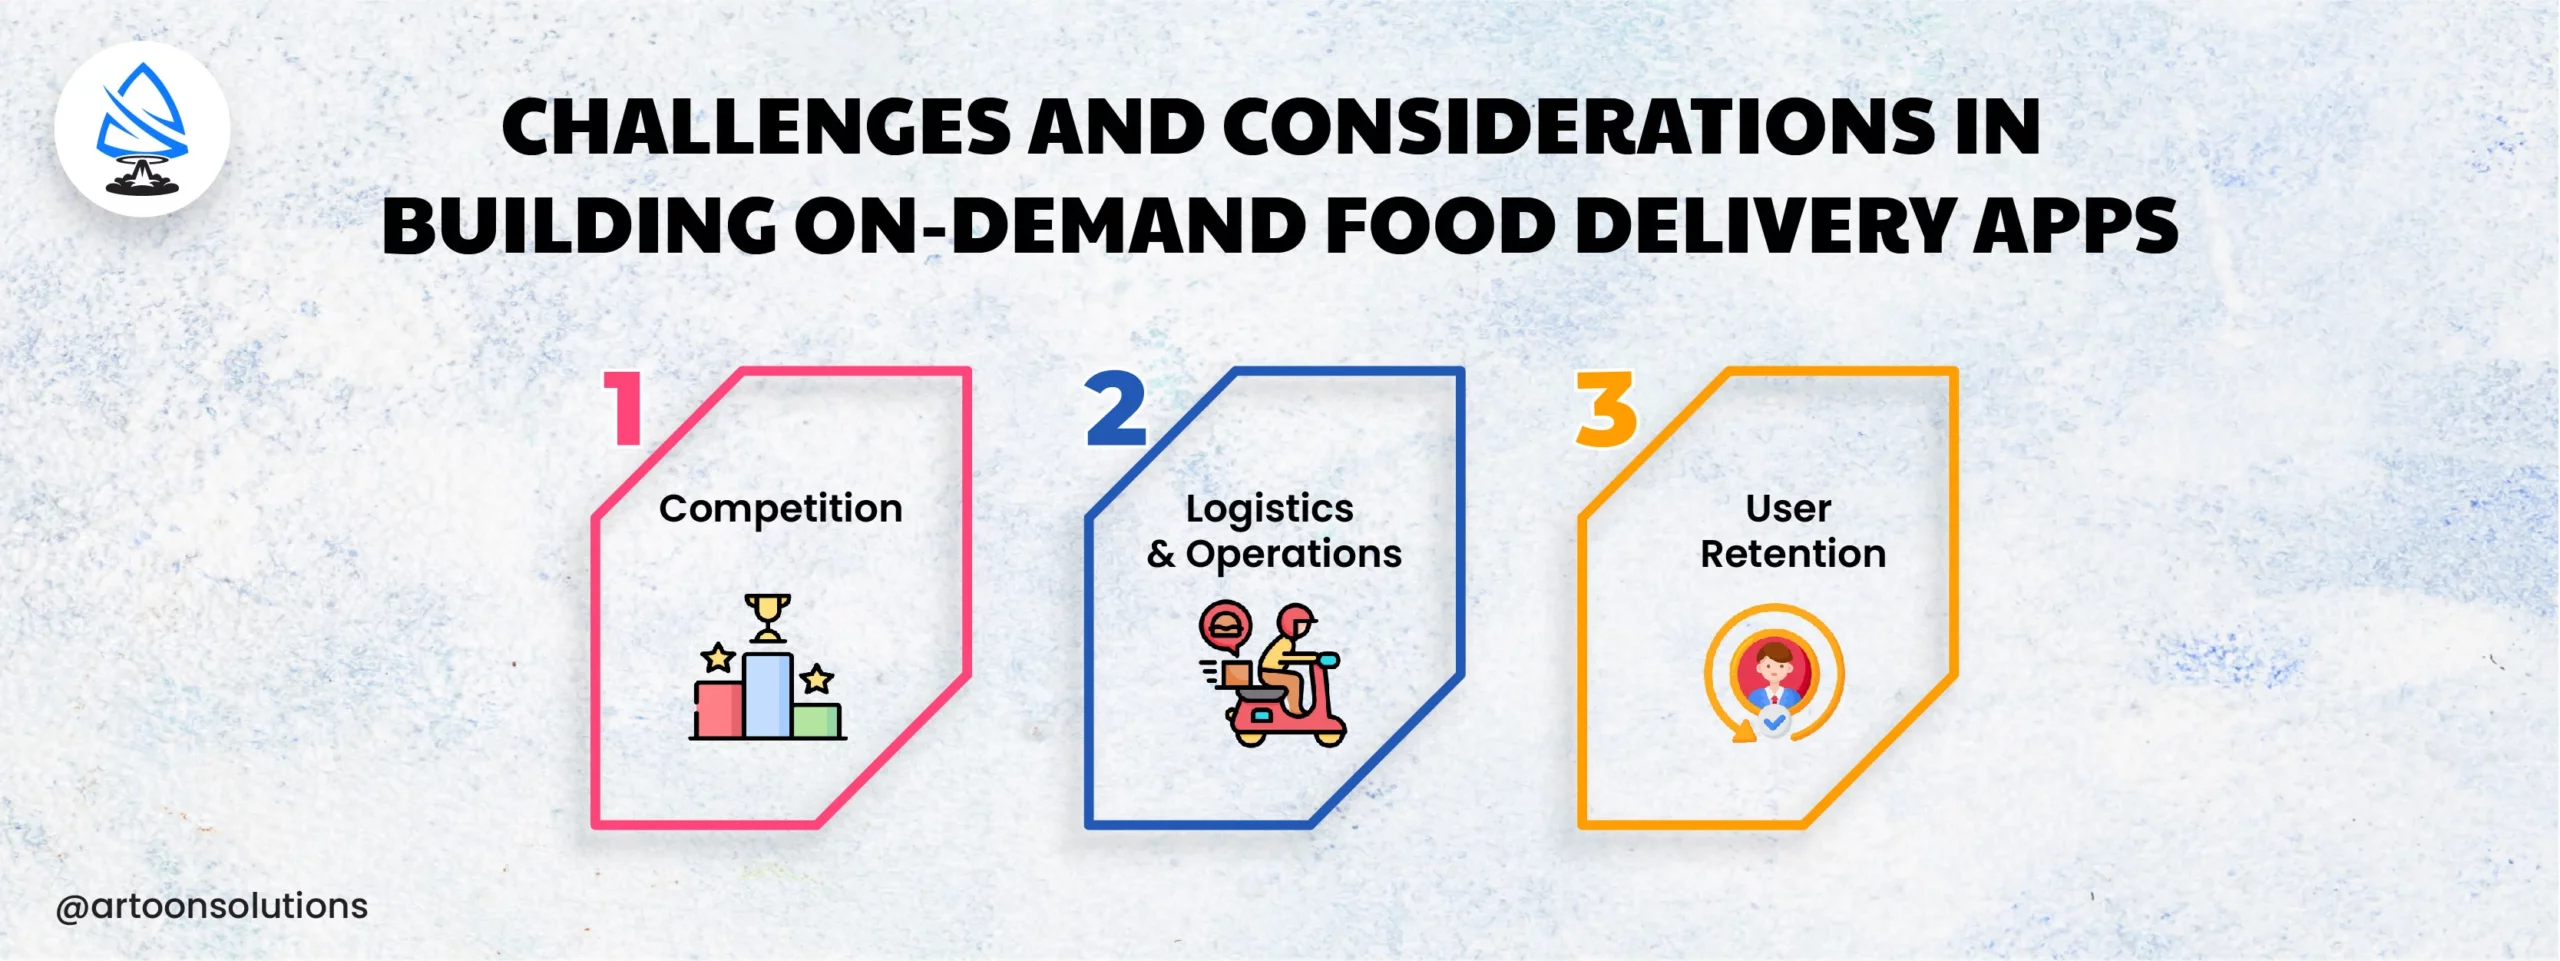 Challenges and Considerations in Building On-Demand Food Delivery Apps